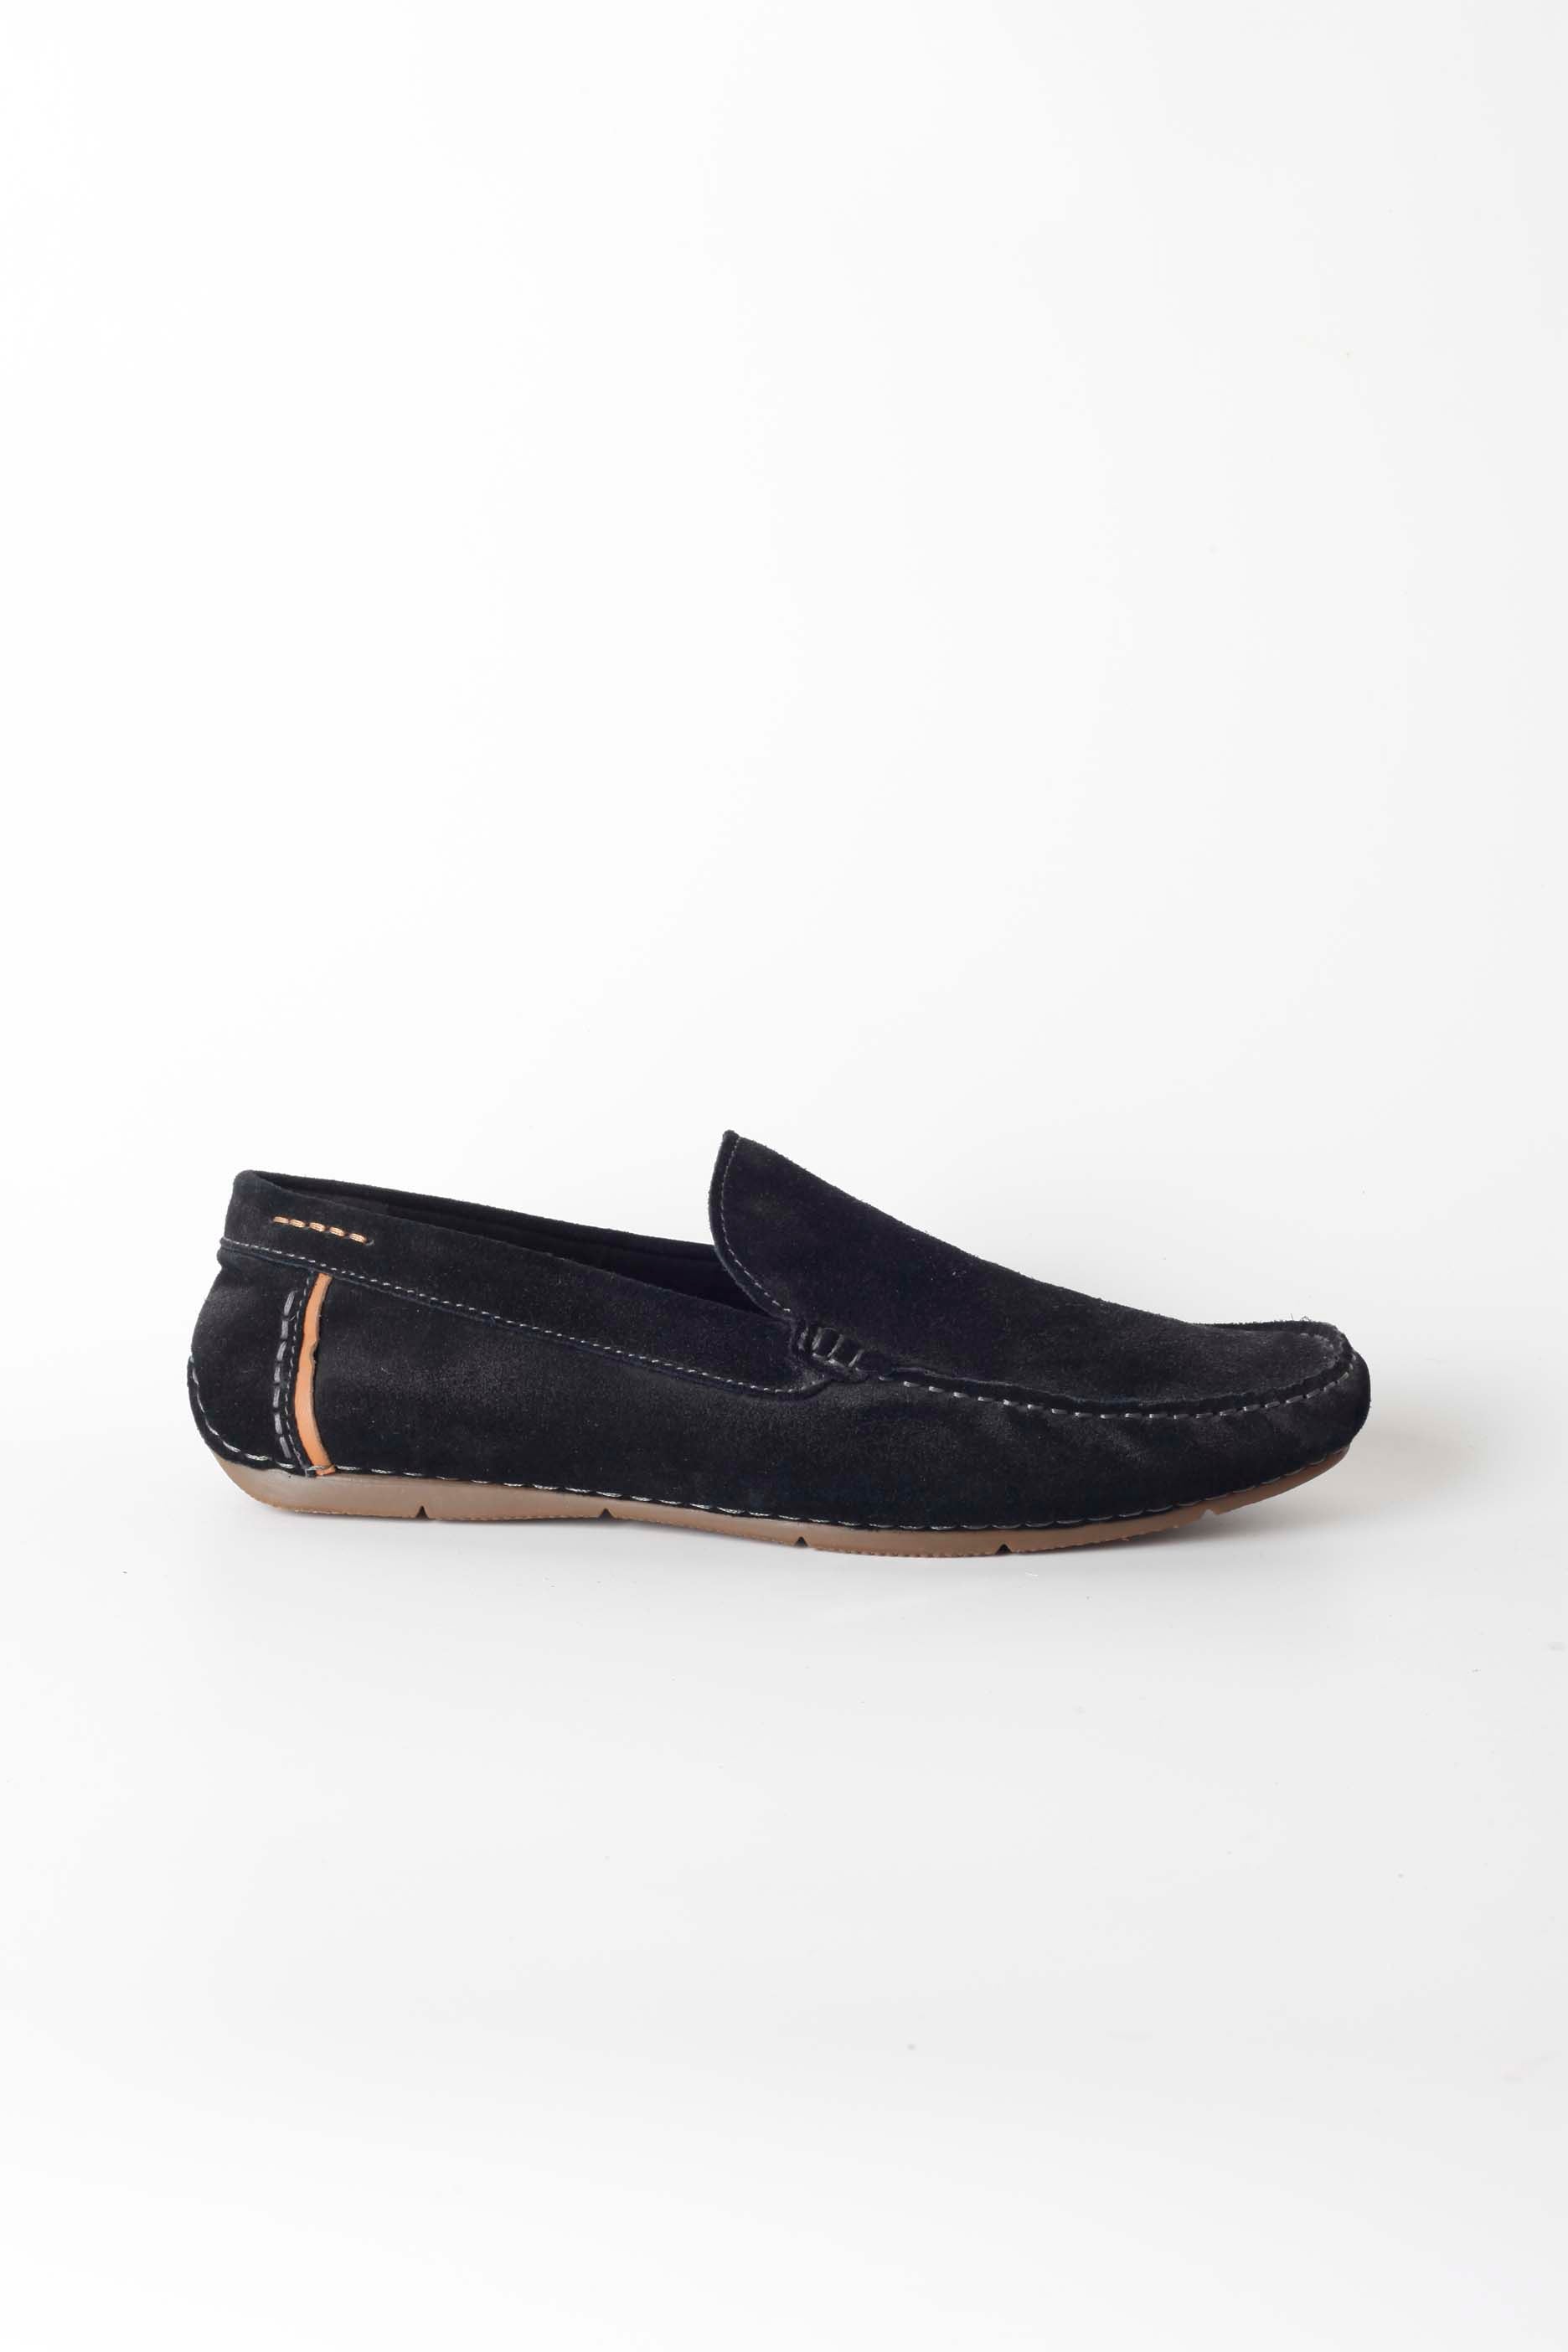 Mens Black Suede Loafers